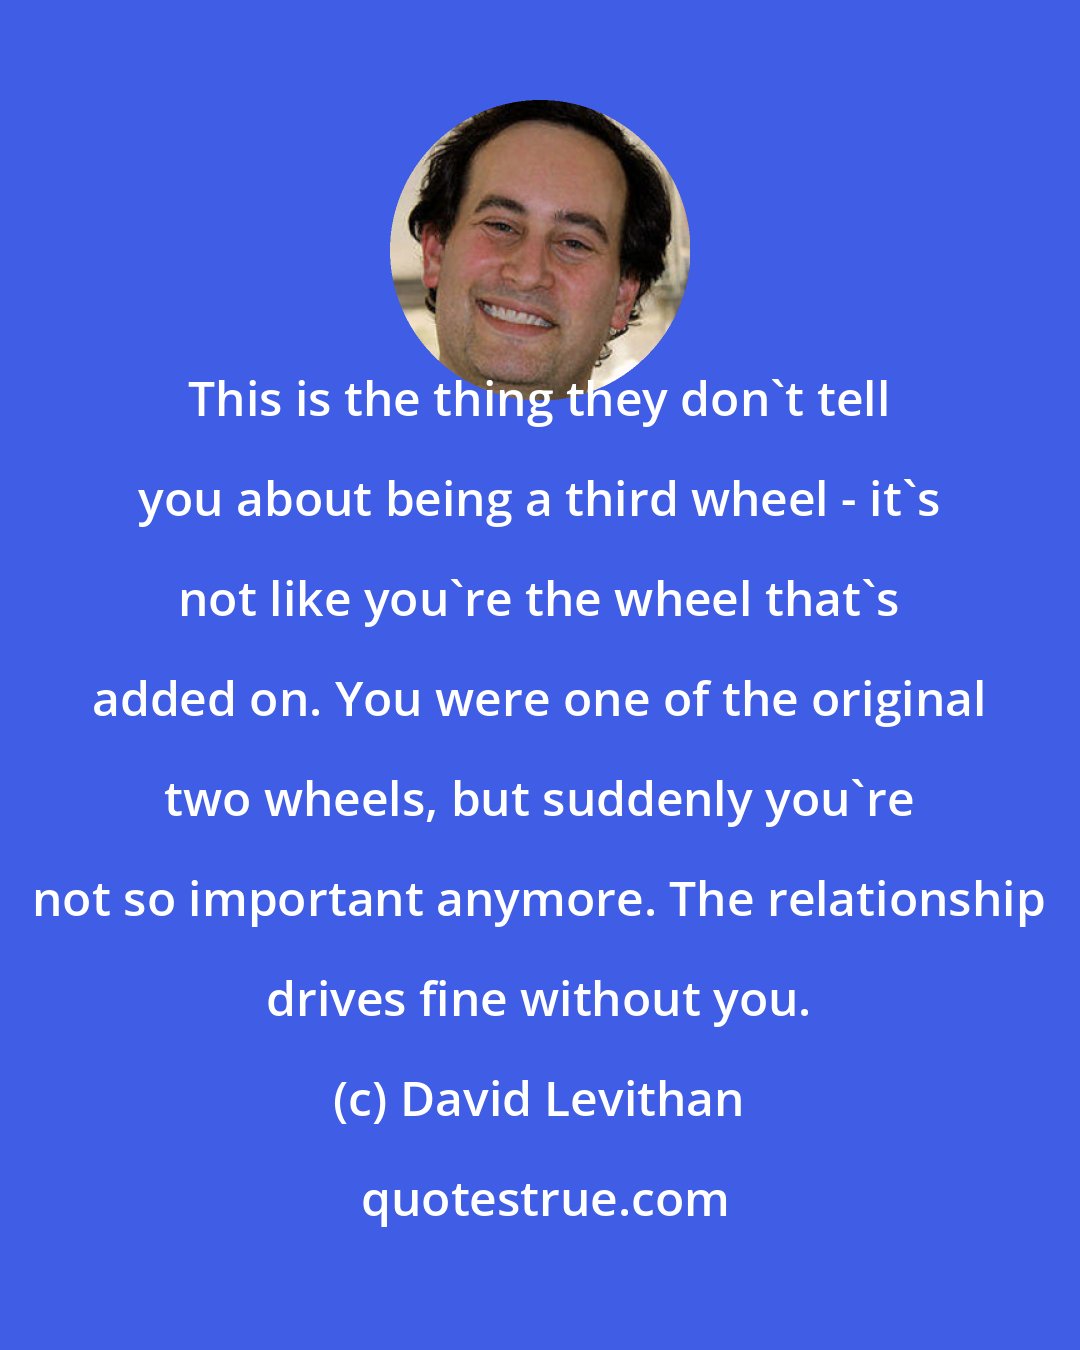 David Levithan: This is the thing they don't tell you about being a third wheel - it's not like you're the wheel that's added on. You were one of the original two wheels, but suddenly you're not so important anymore. The relationship drives fine without you.